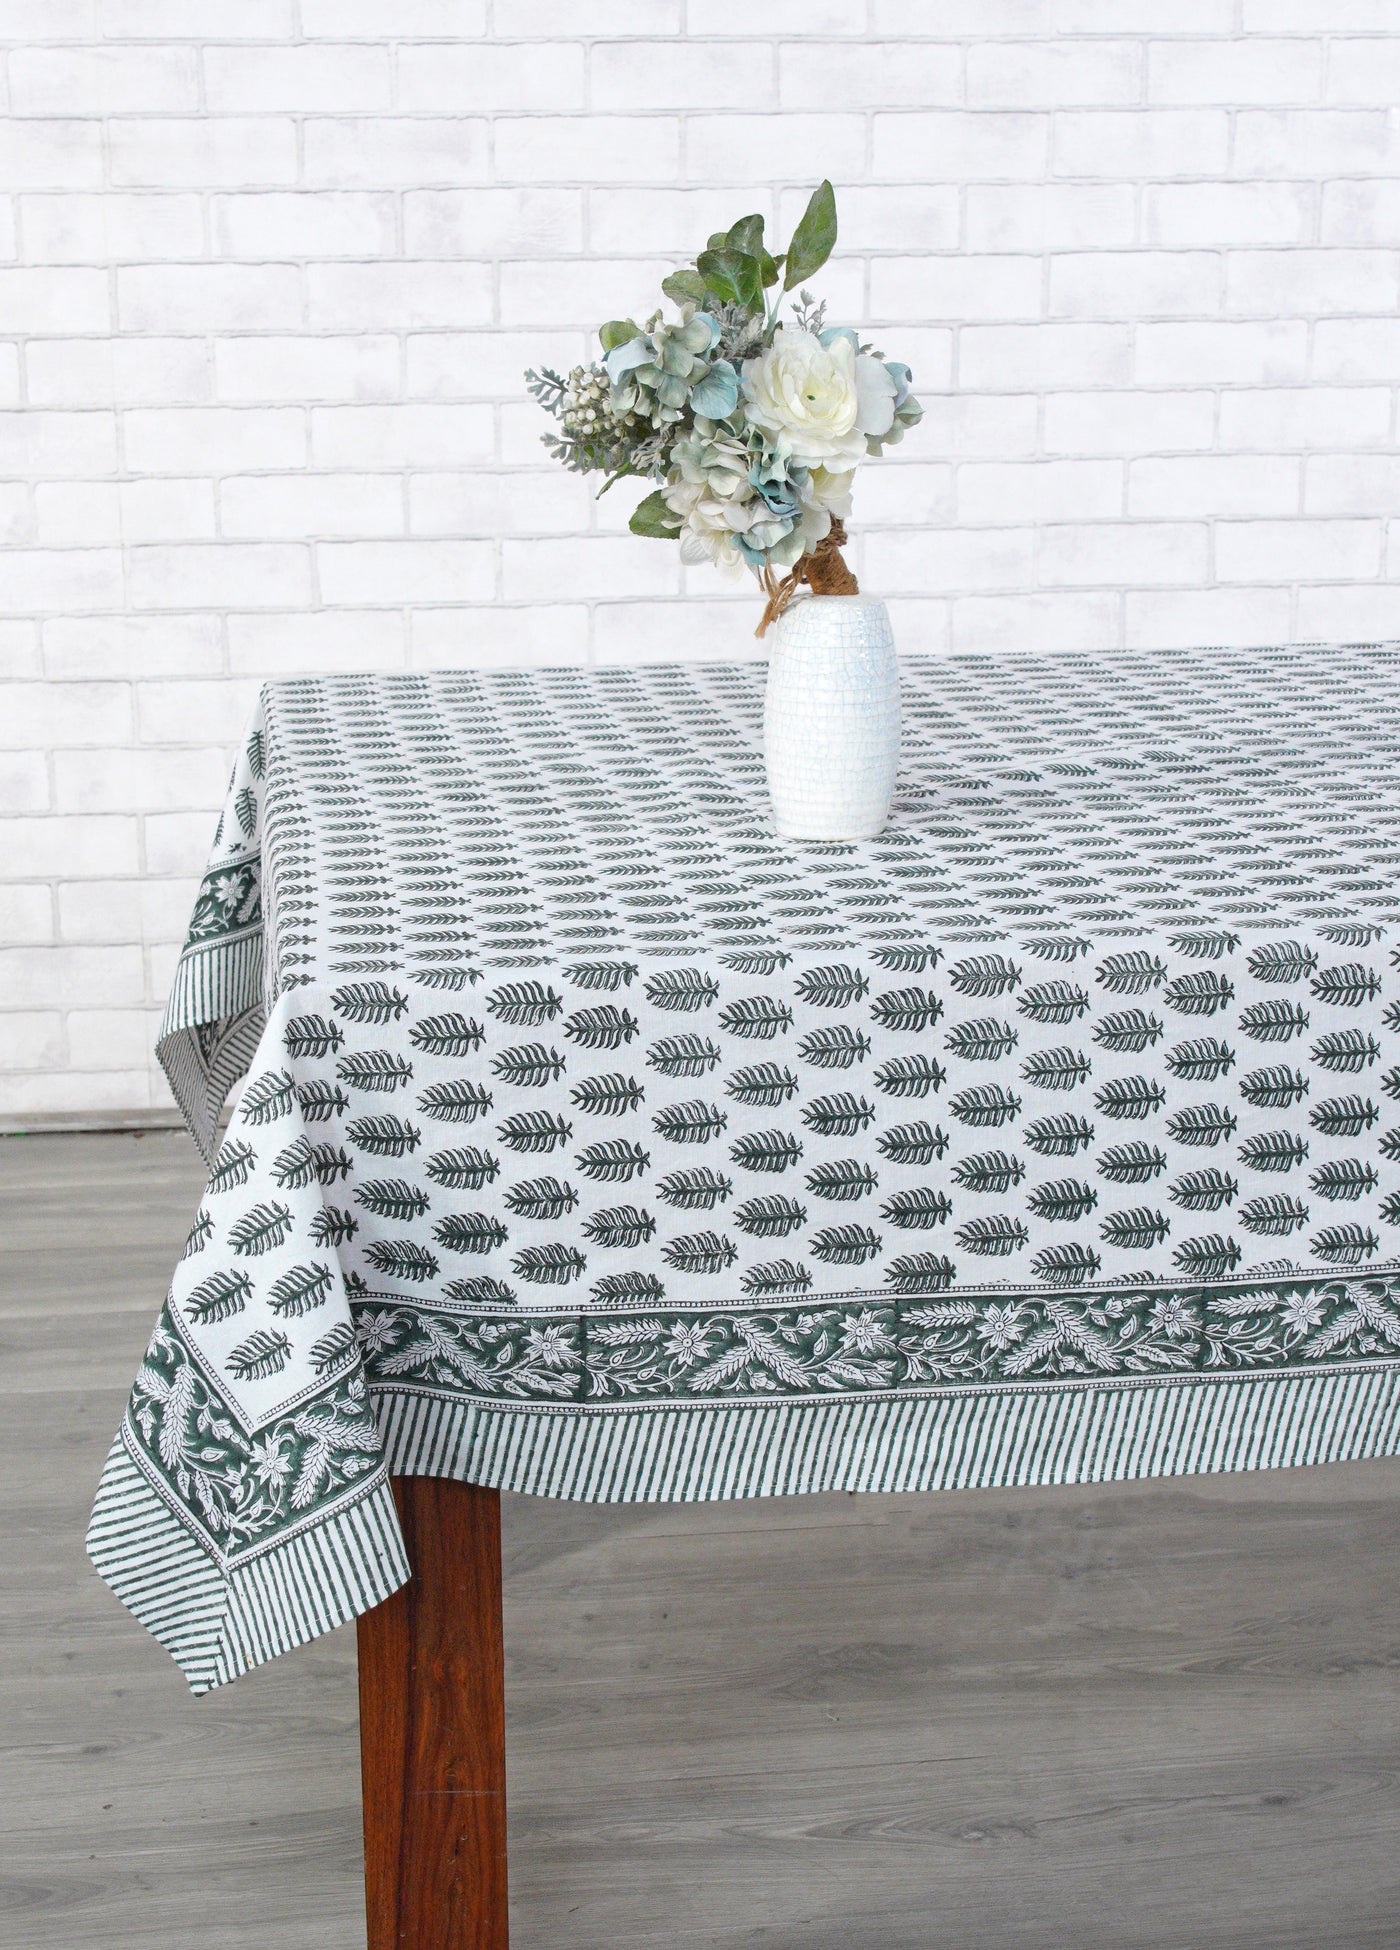 Fabricrush -Emerald Green Cotton Tablecloth, Handblock Print Floral Table Cloth for Kitchen Dining Linen I Thanksgiving, Christmas, Wedding, Fall Décor 4 Seater 60x60 Inches Square